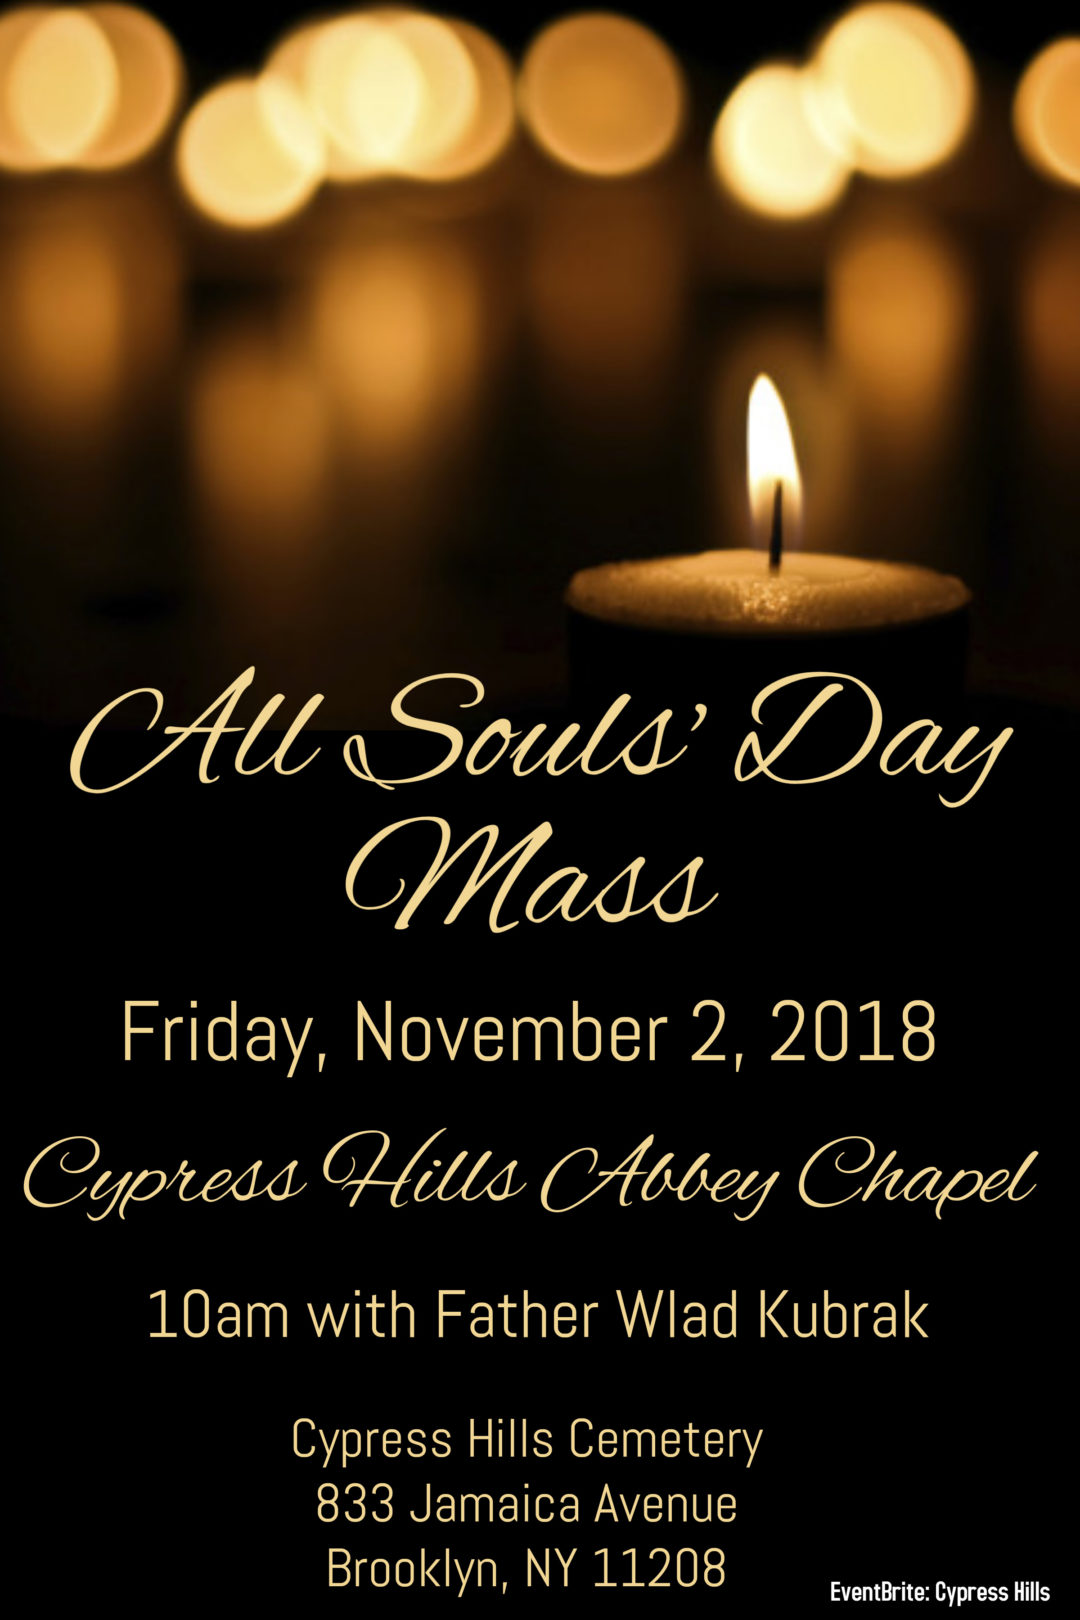 All Souls' Day Mass Cypress Hills Cemetery